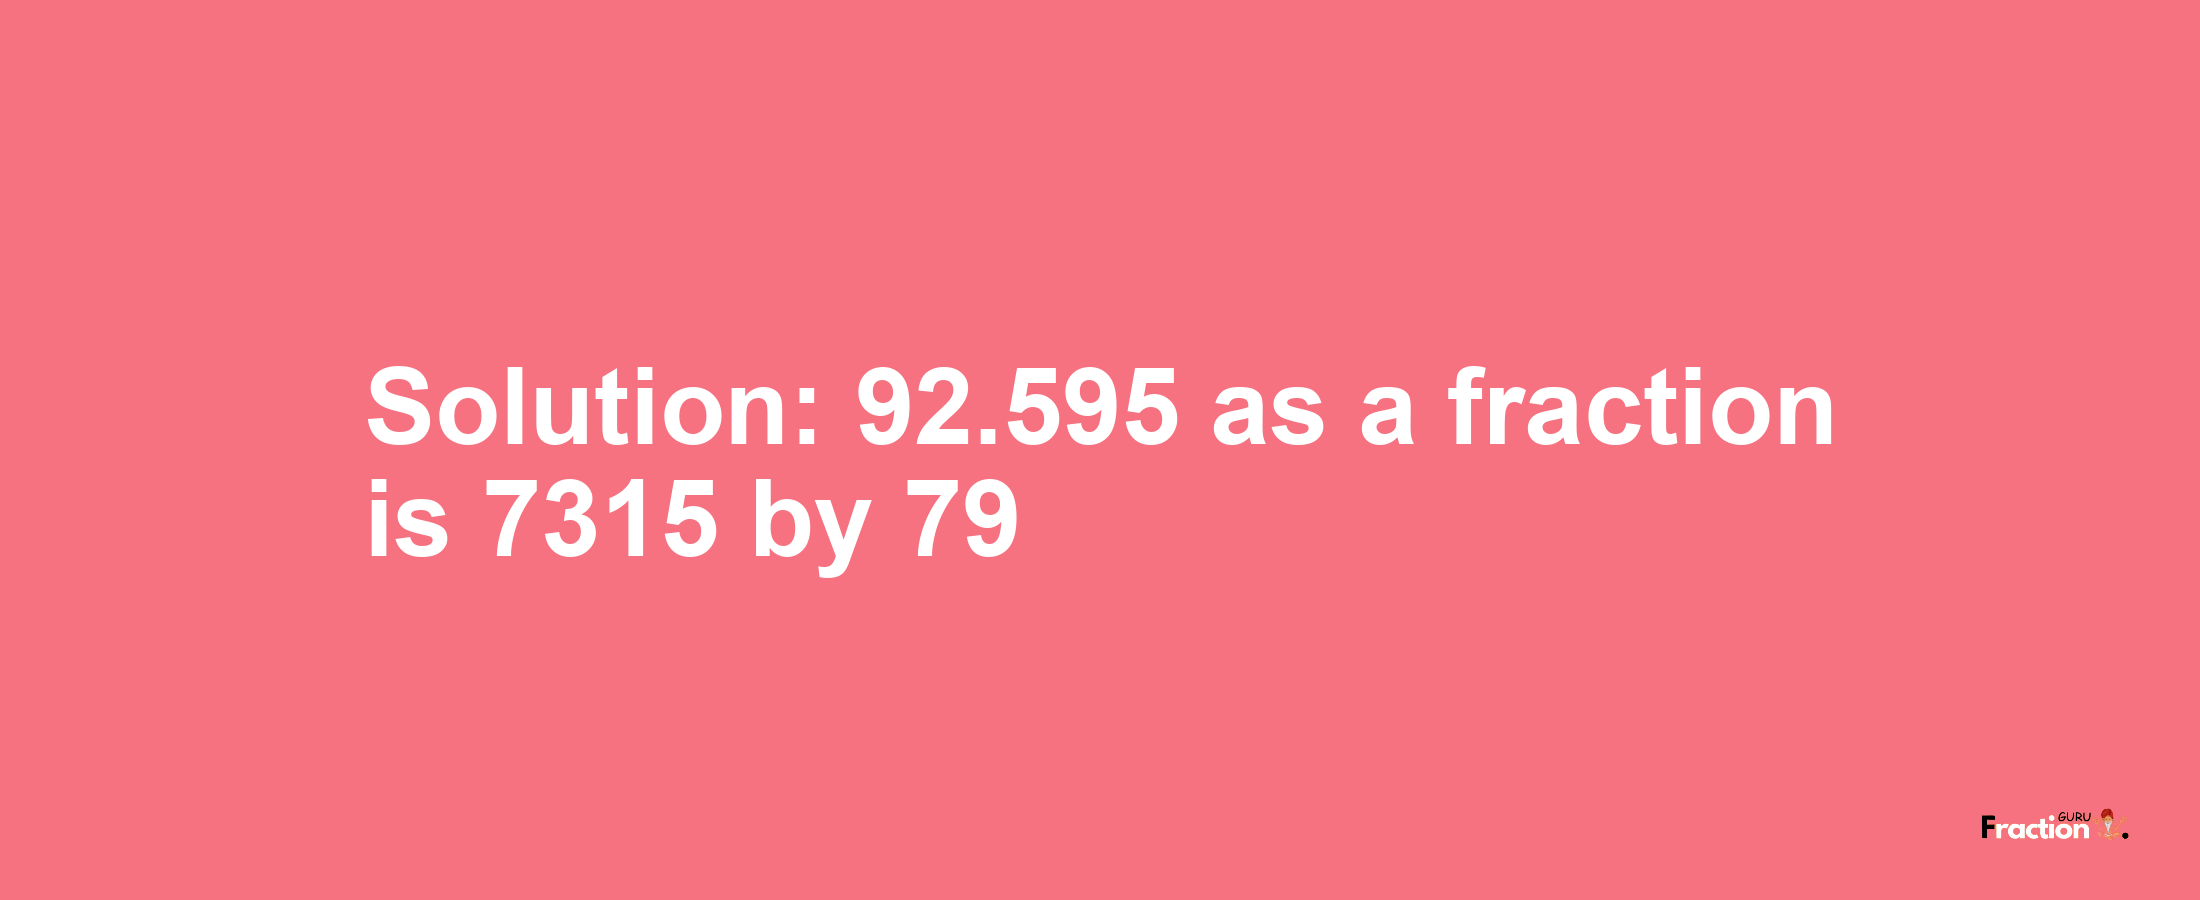 Solution:92.595 as a fraction is 7315/79